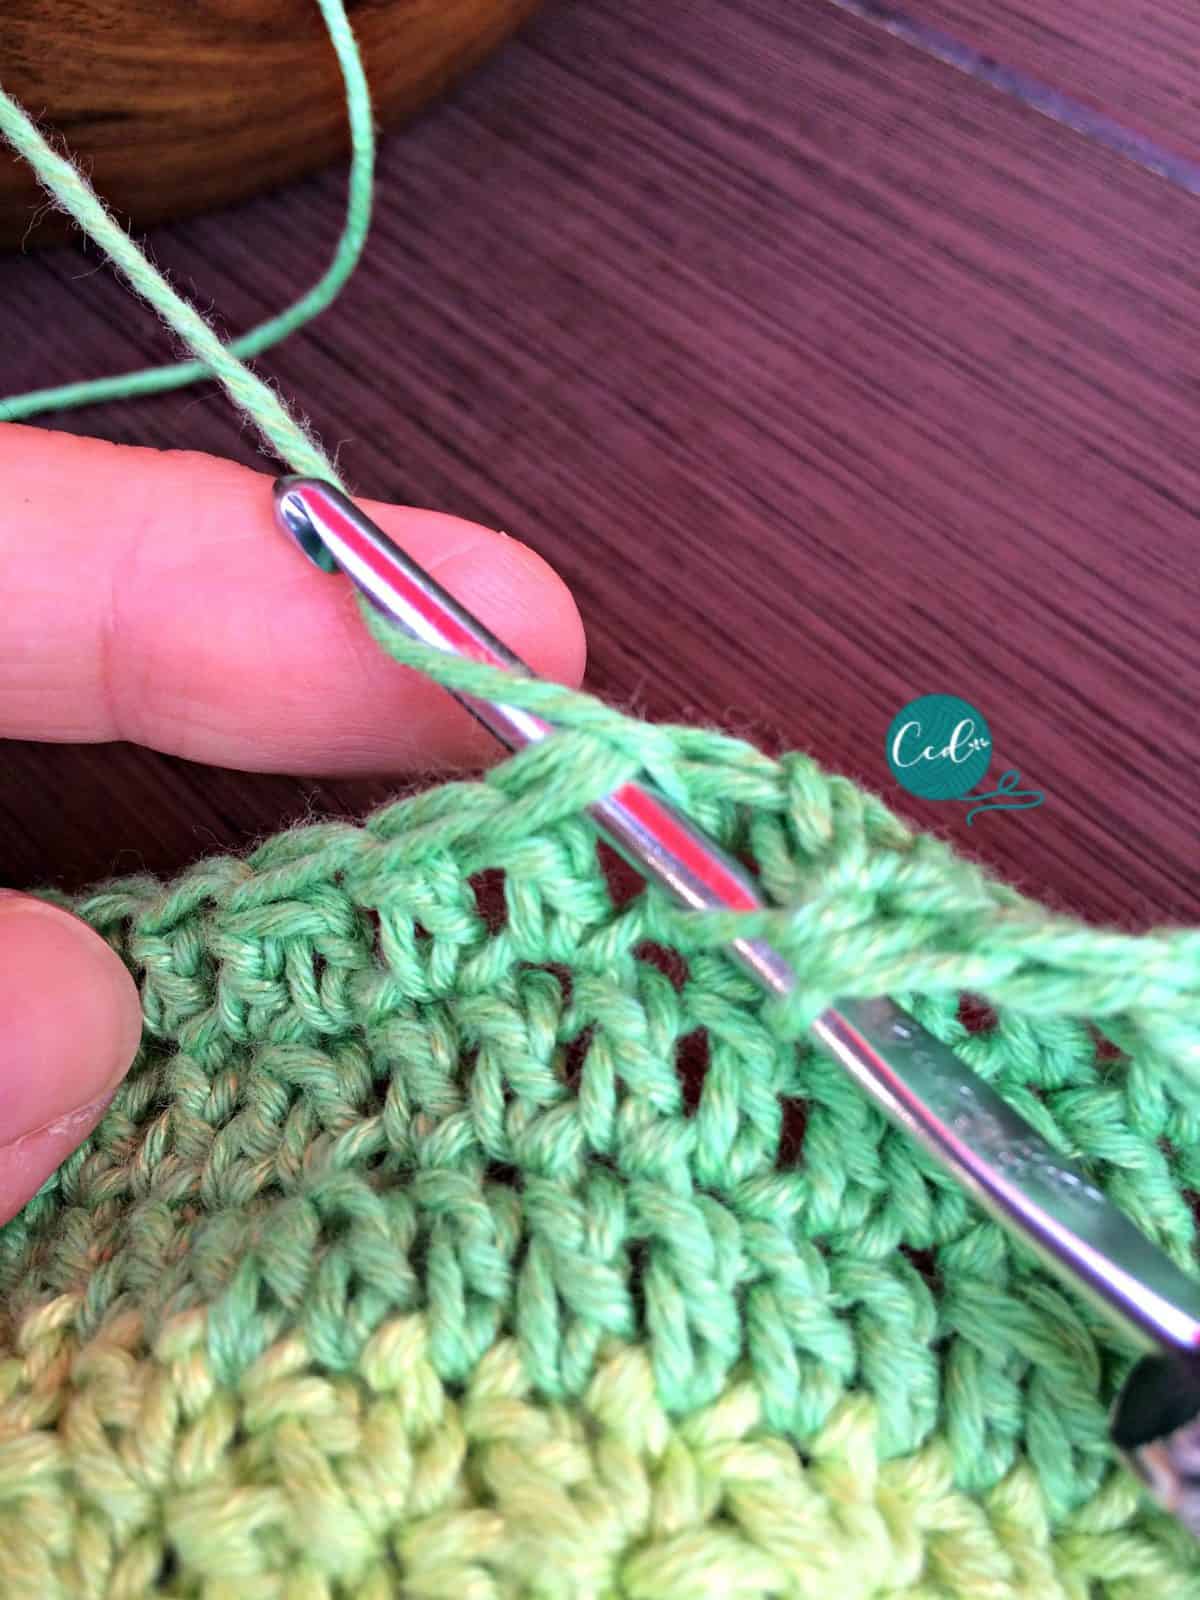 Insert hook in stitch to double crochet two together.